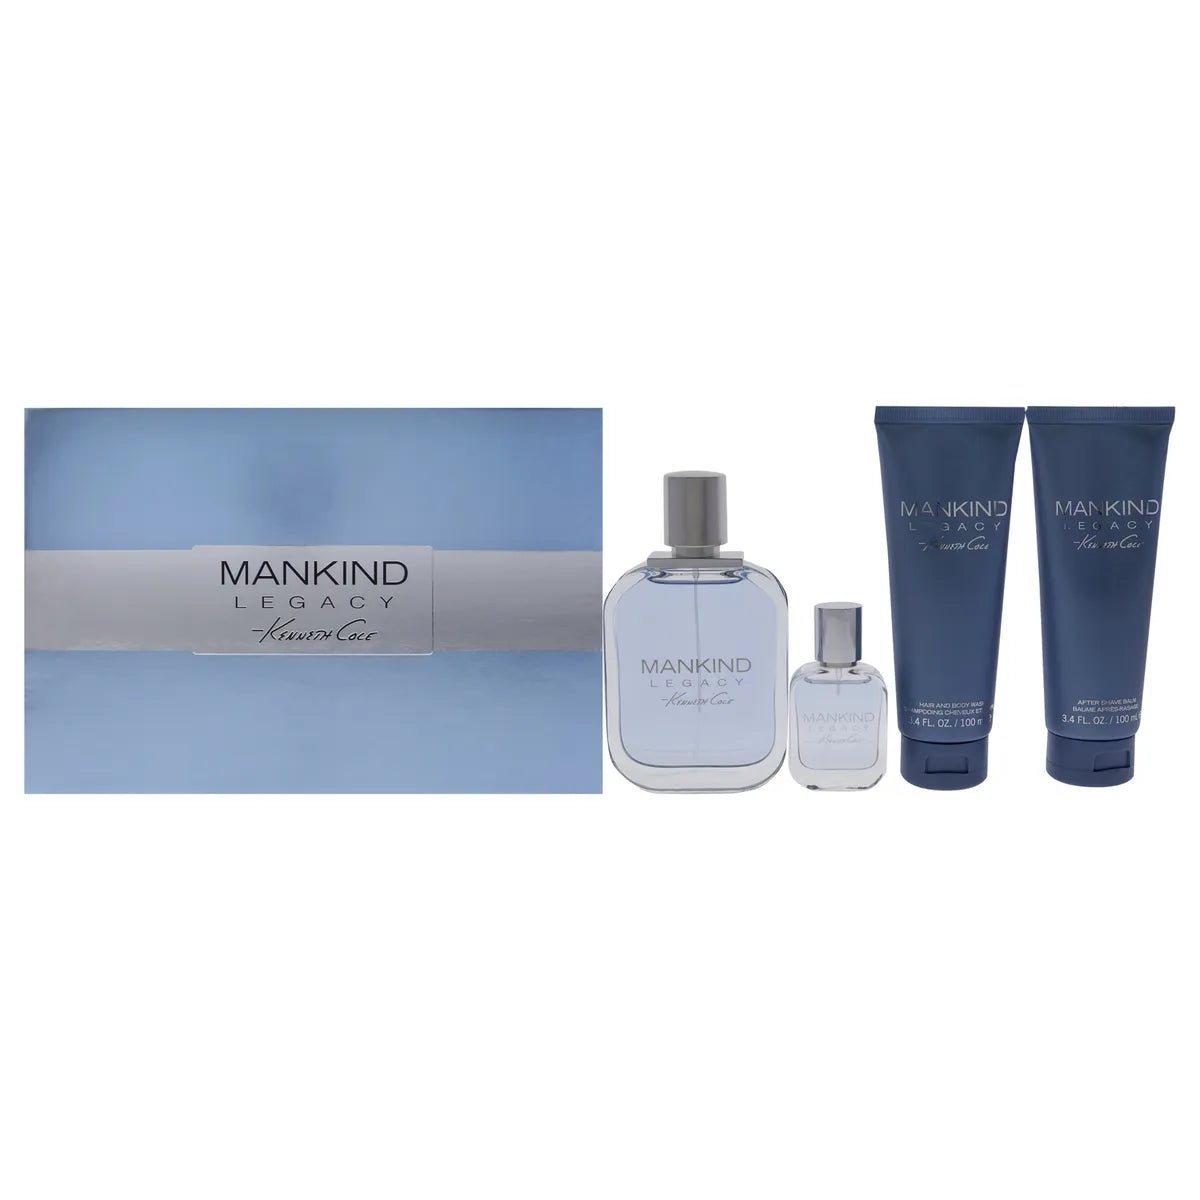 Kenneth Cole Mankind Legacy Collection Set | My Perfume Shop Australia